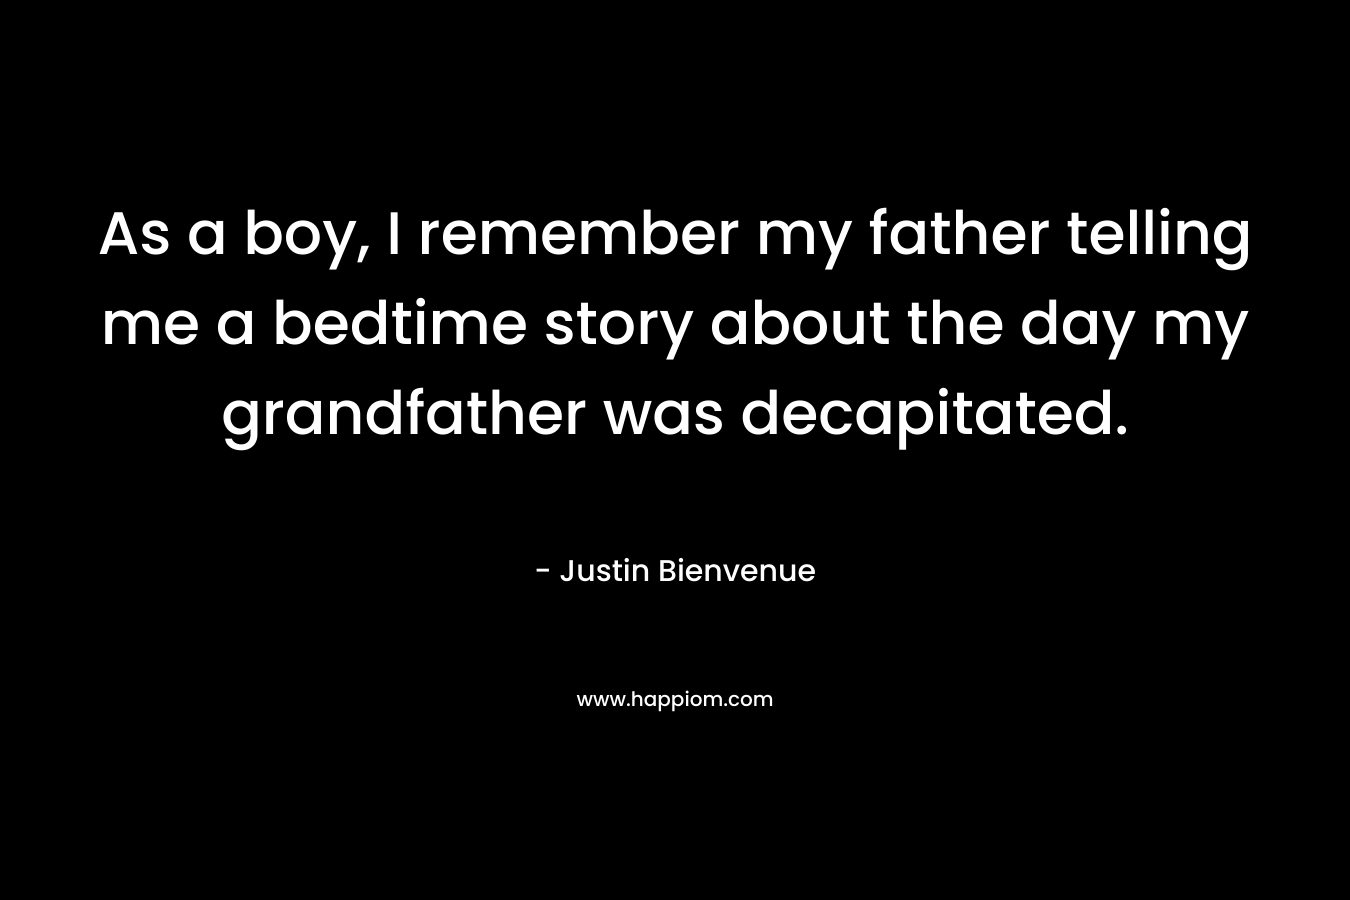 As a boy, I remember my father telling me a bedtime story about the day my grandfather was decapitated.